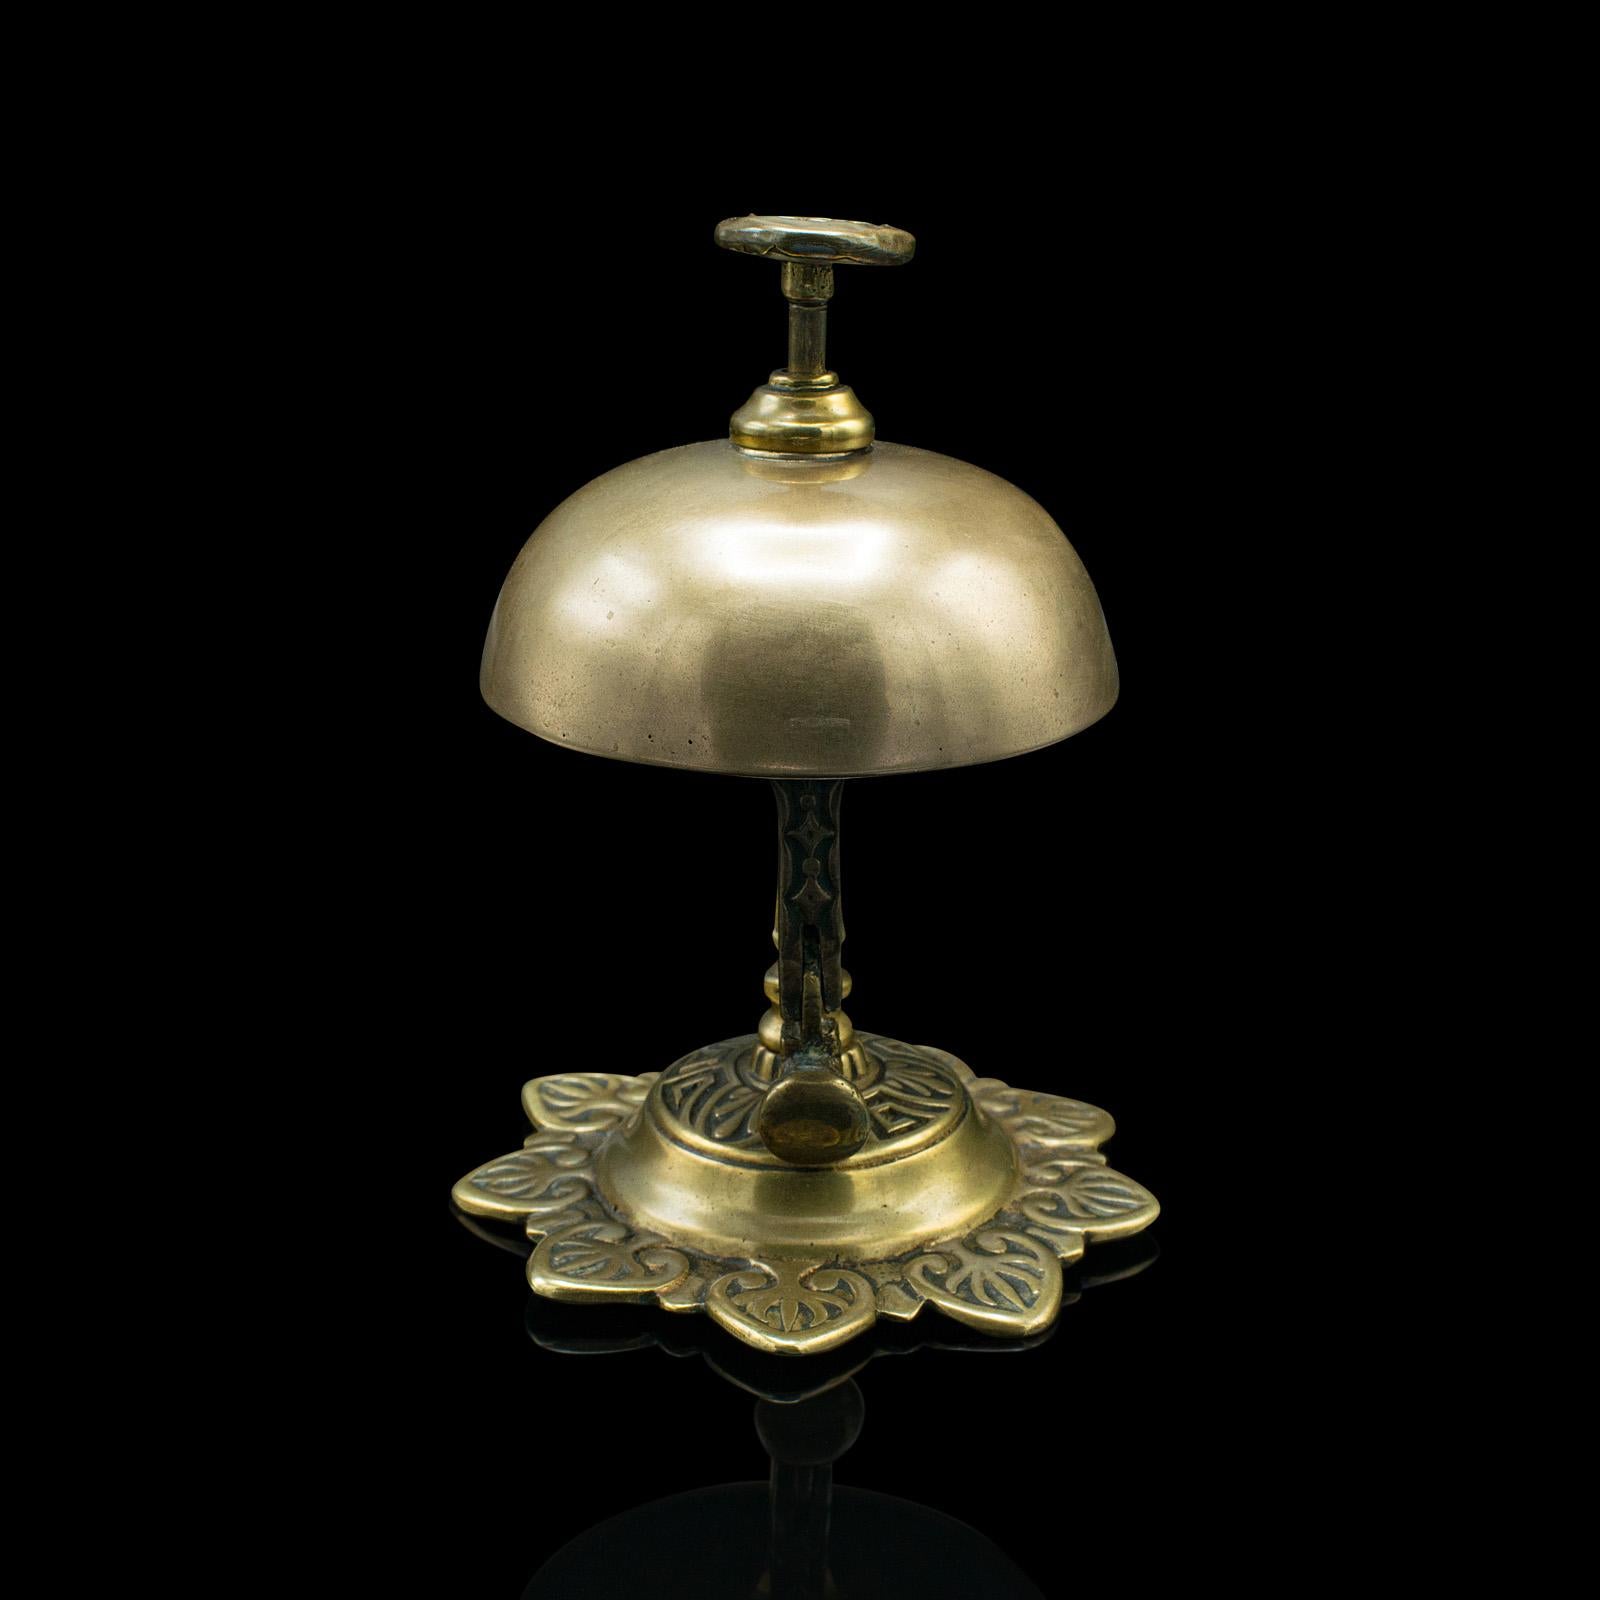 This is an antique reception bell. An English, brass country house hotel push button bell, dating to the late Victorian period, circa 1900.

Charming counter-top bell, ideal for a working reception desk
Displays a desirable aged patina and in good